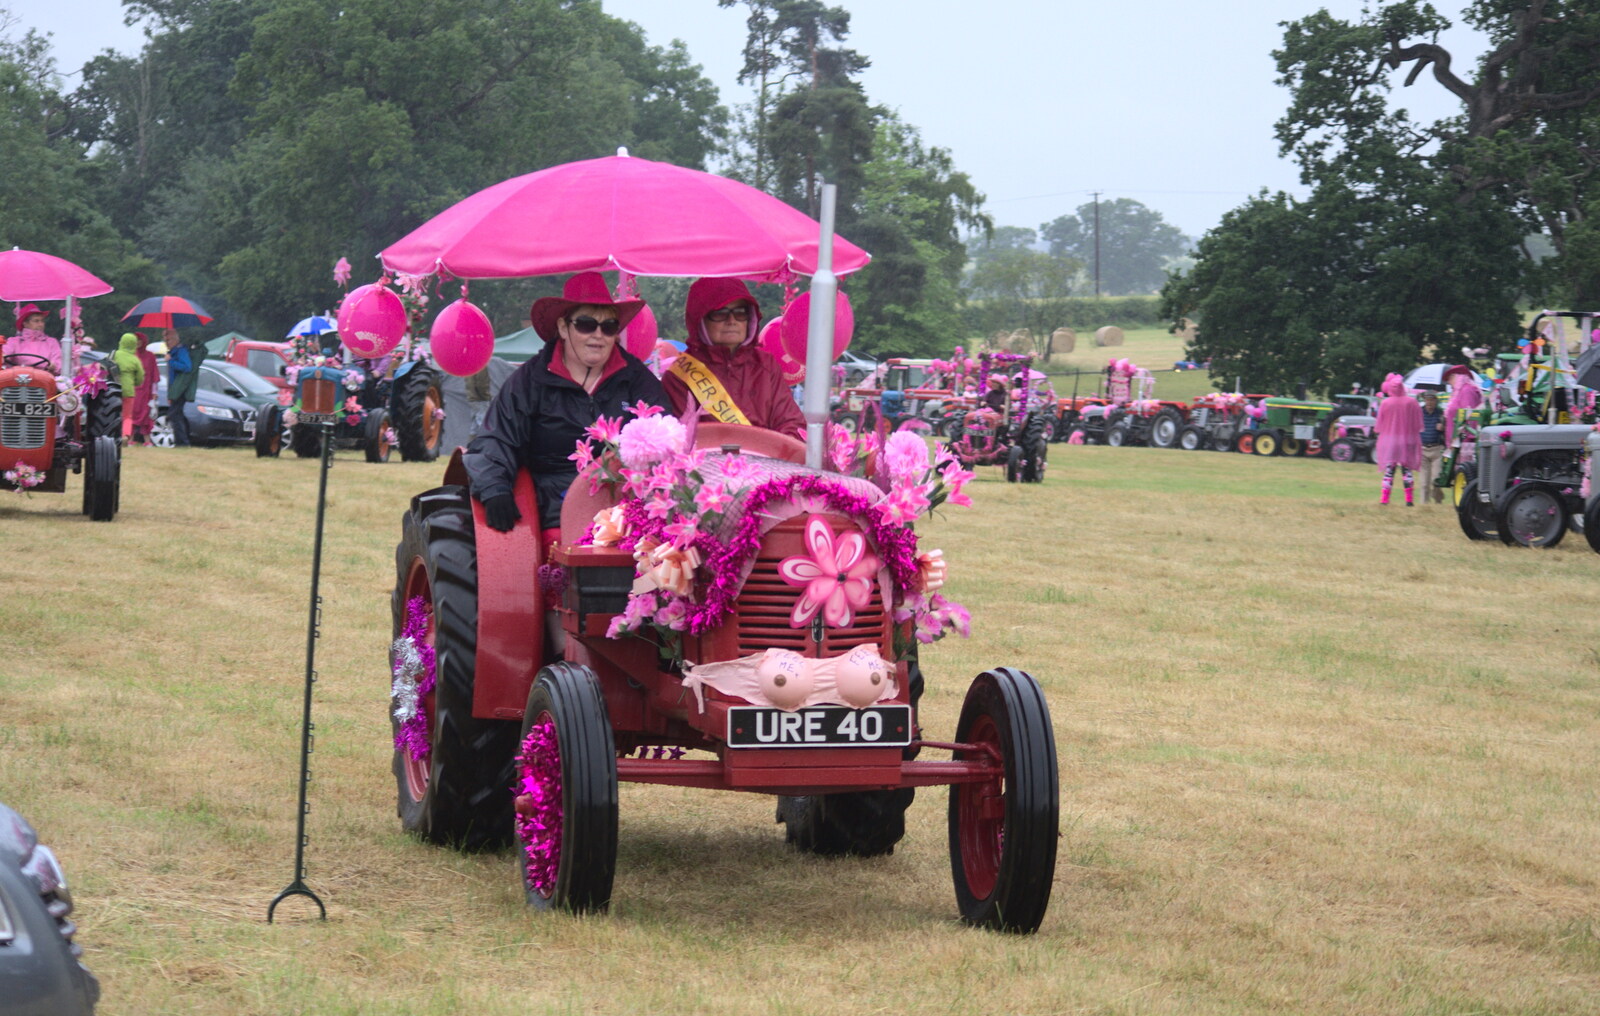 Tractors roll into Gawdy Park from The Pink Ladies Tractor Run, Harleston and Gawdy Park, Norfolk - 5th July 2015